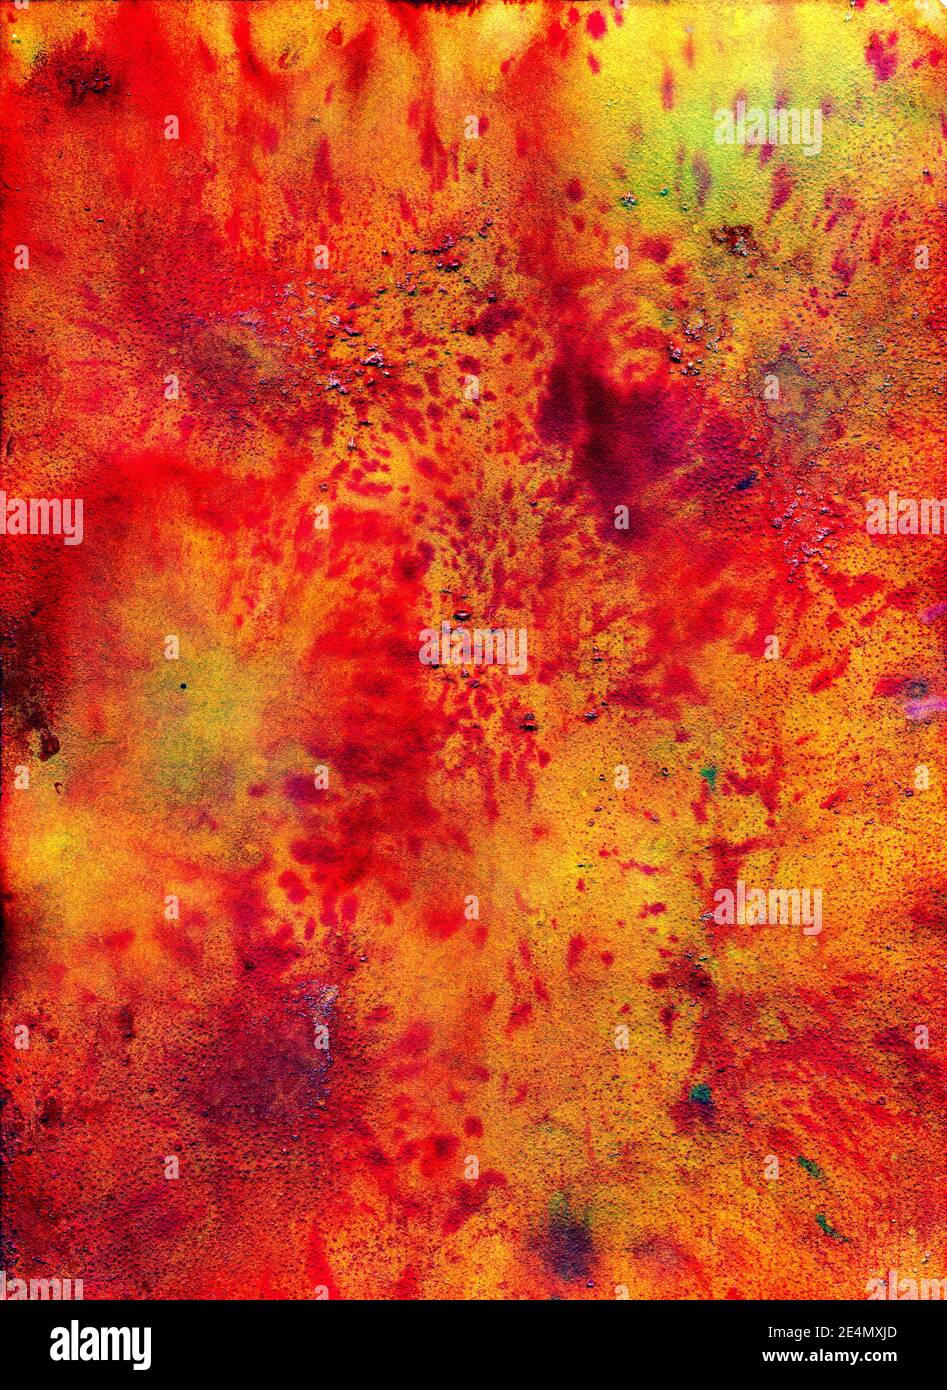 Background, watercolor texture. Red and orange background with splashes of red paint, green shades Stock Photo